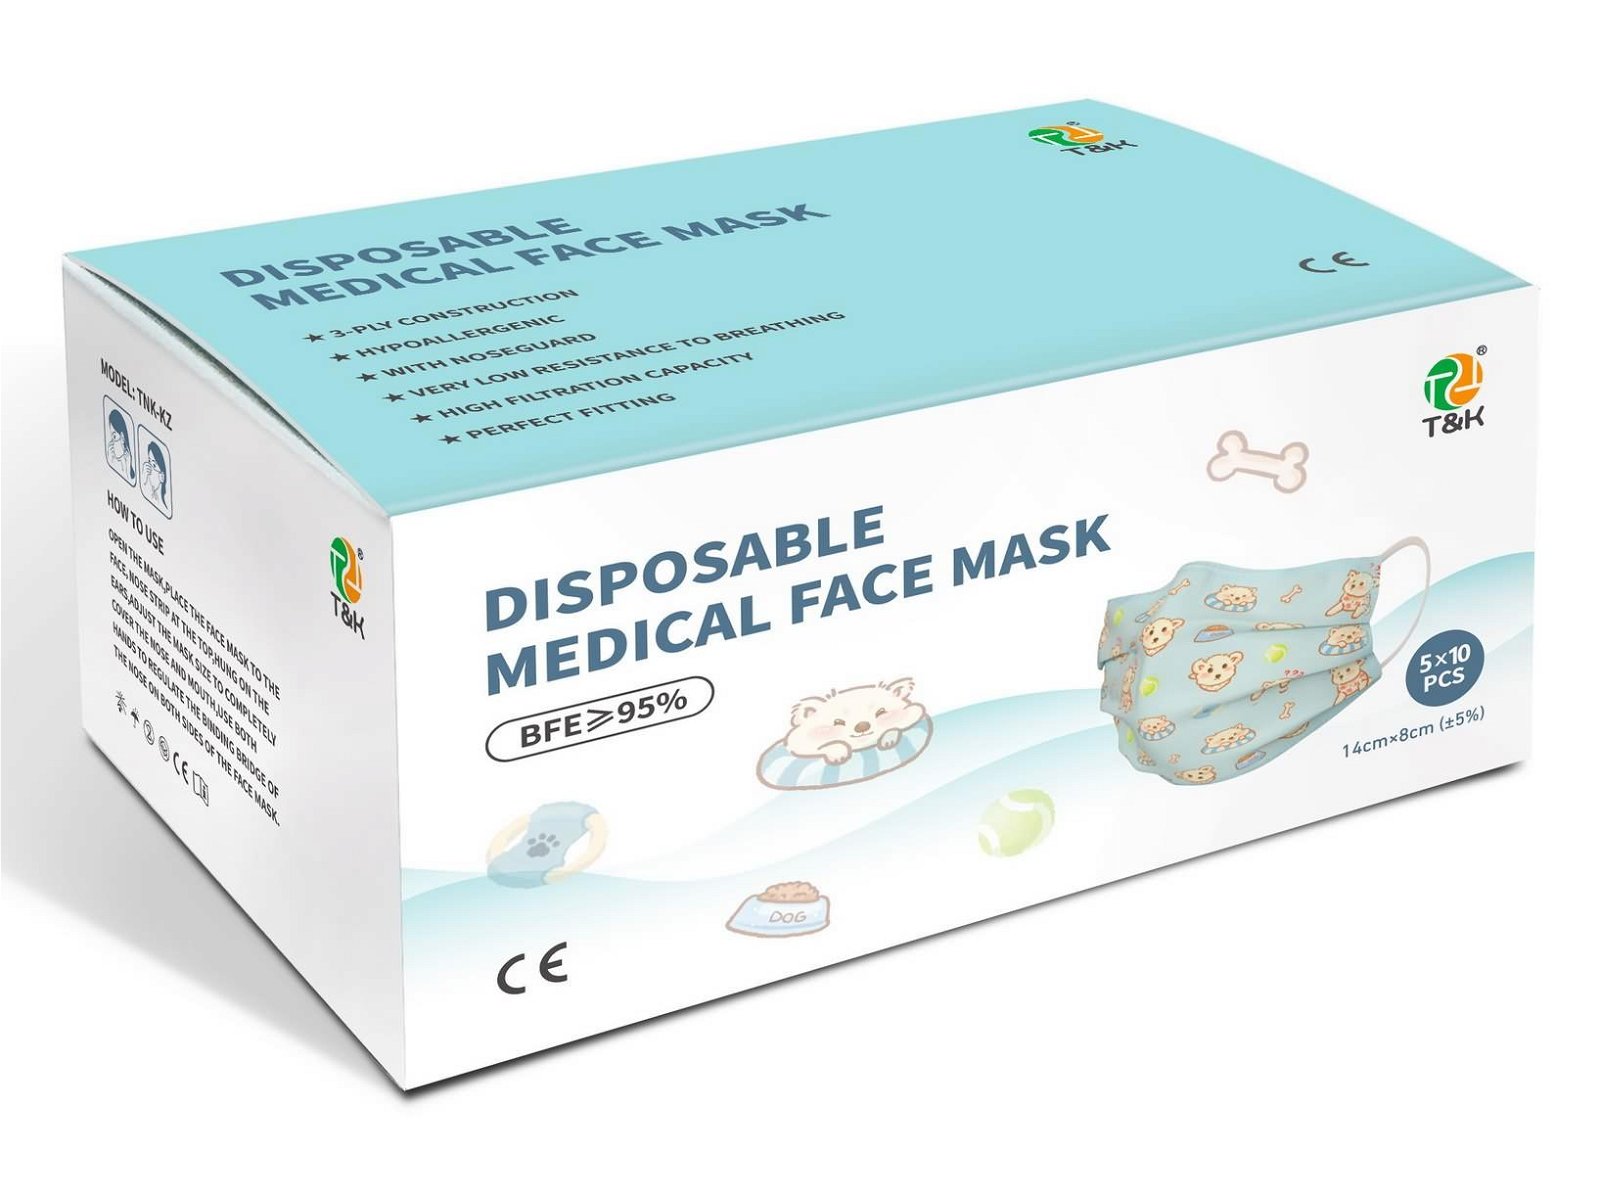 Type I Medical Disposable Mask for Kids (Cartoon) 4